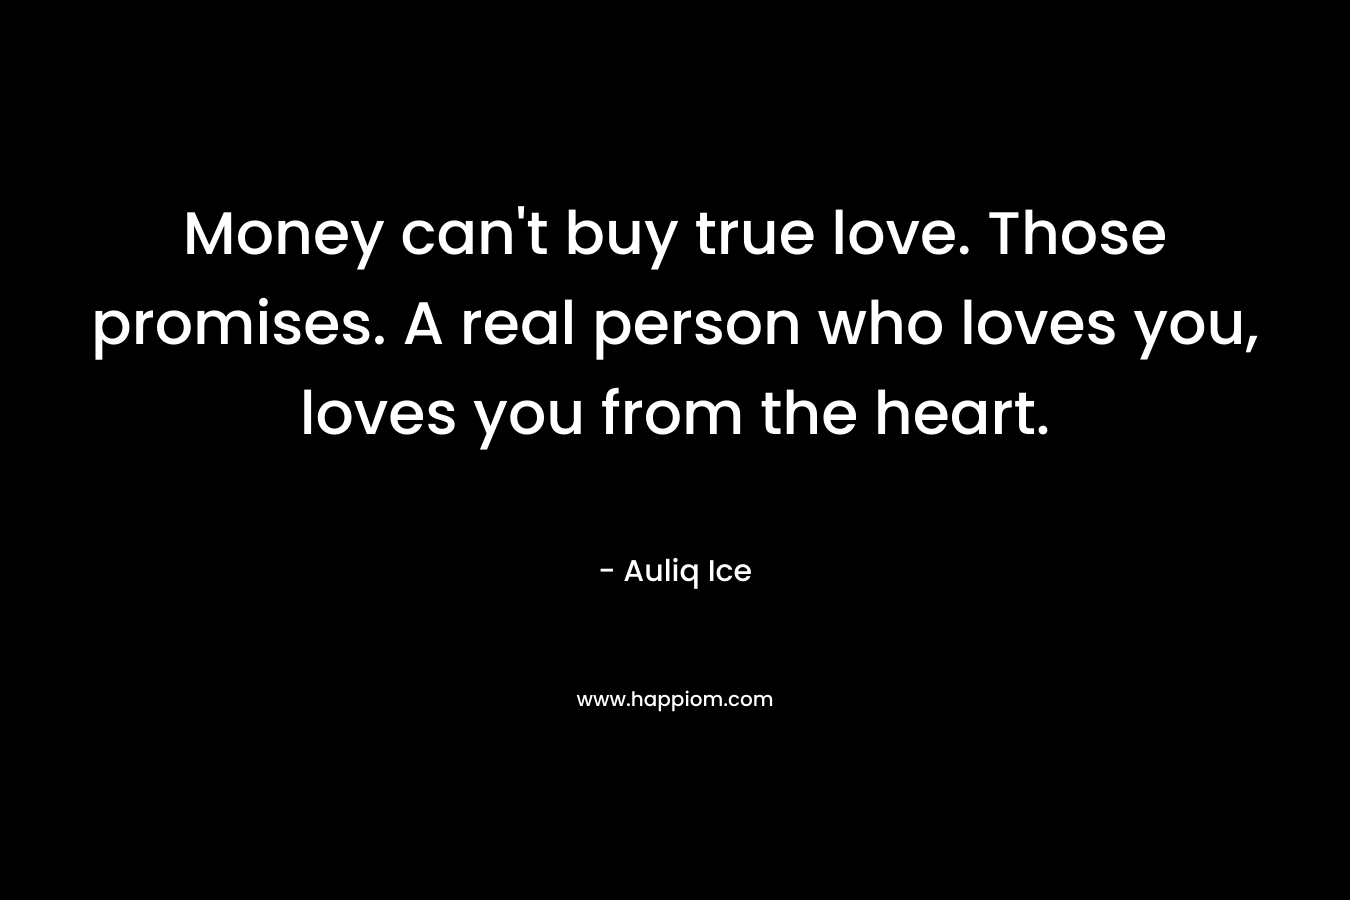 Money can’t buy true love. Those promises. A real person who loves you, loves you from the heart. – Auliq Ice